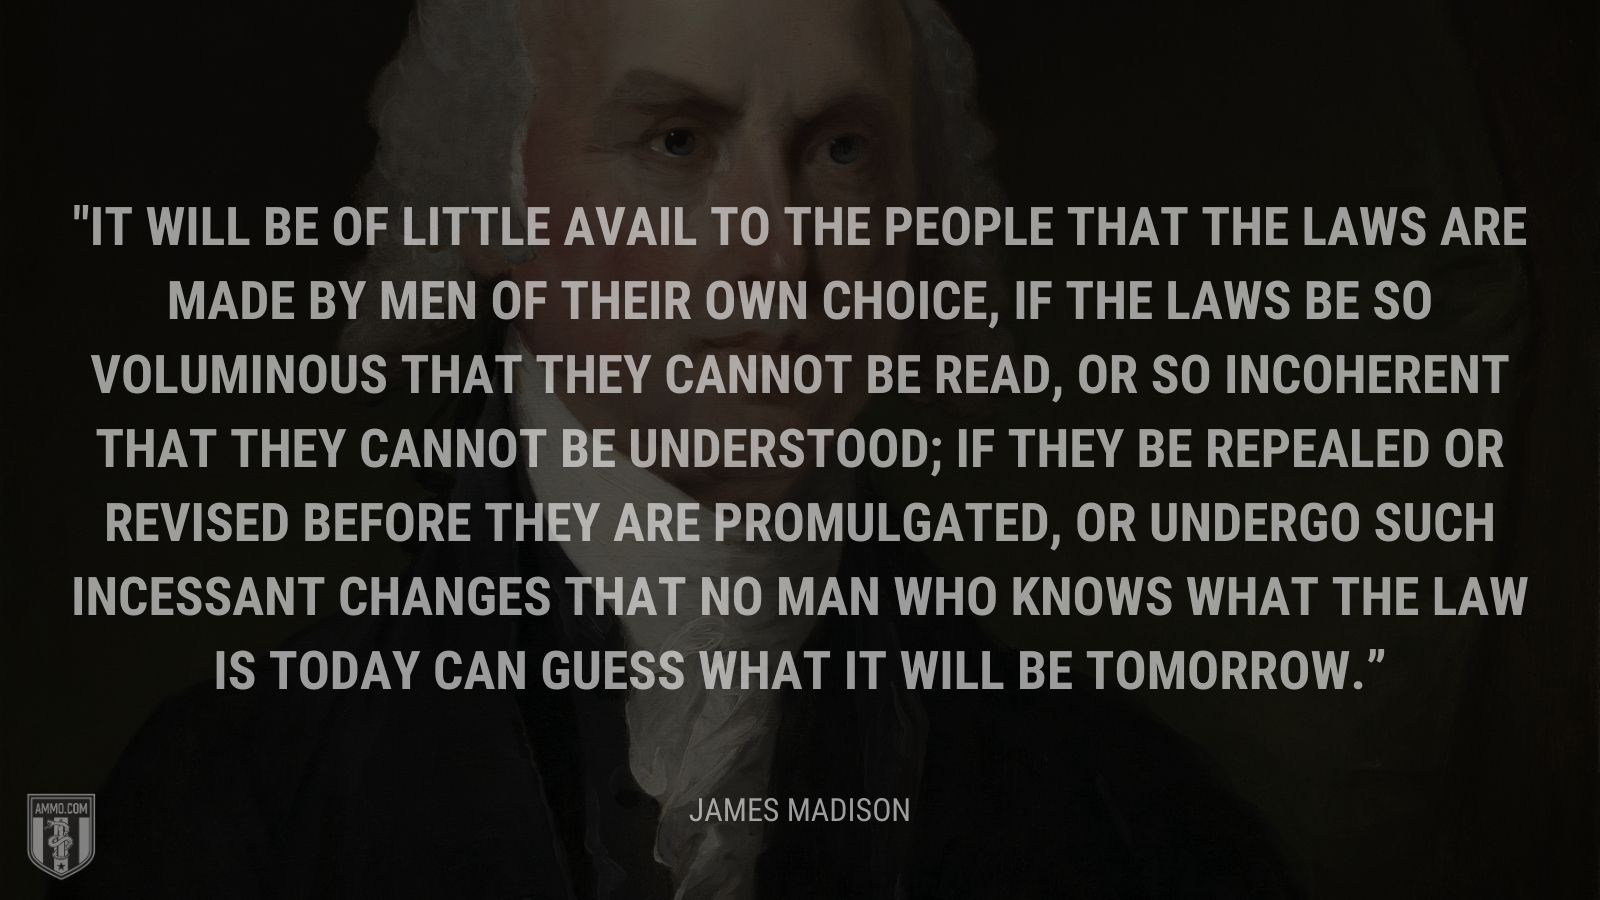 “It will be of little avail to the people that the laws are made by men of their own choice, if the laws be so voluminous that they cannot be read, or so incoherent that they cannot be understood; if they be repealed or revised before they are promulgated, or undergo such incessant changes that no man who knows what the law is today can guess what it will be tomorrow.” - James Madison